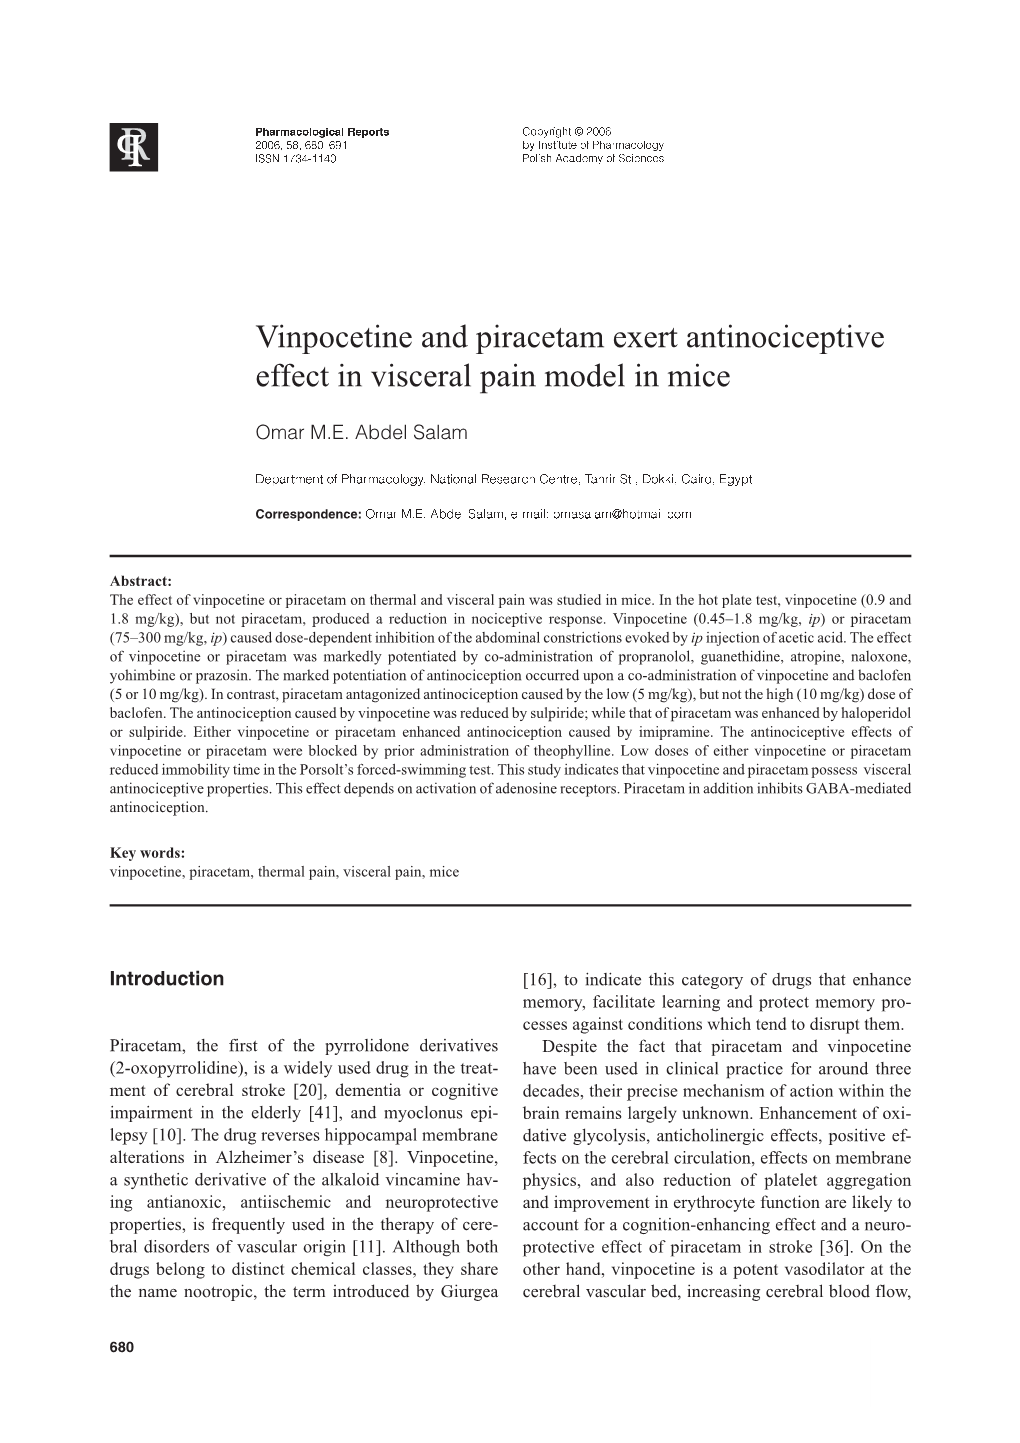 Vinpocetine and Piracetam Exert Antinociceptive Effect in Visceral Pain Model in Mice